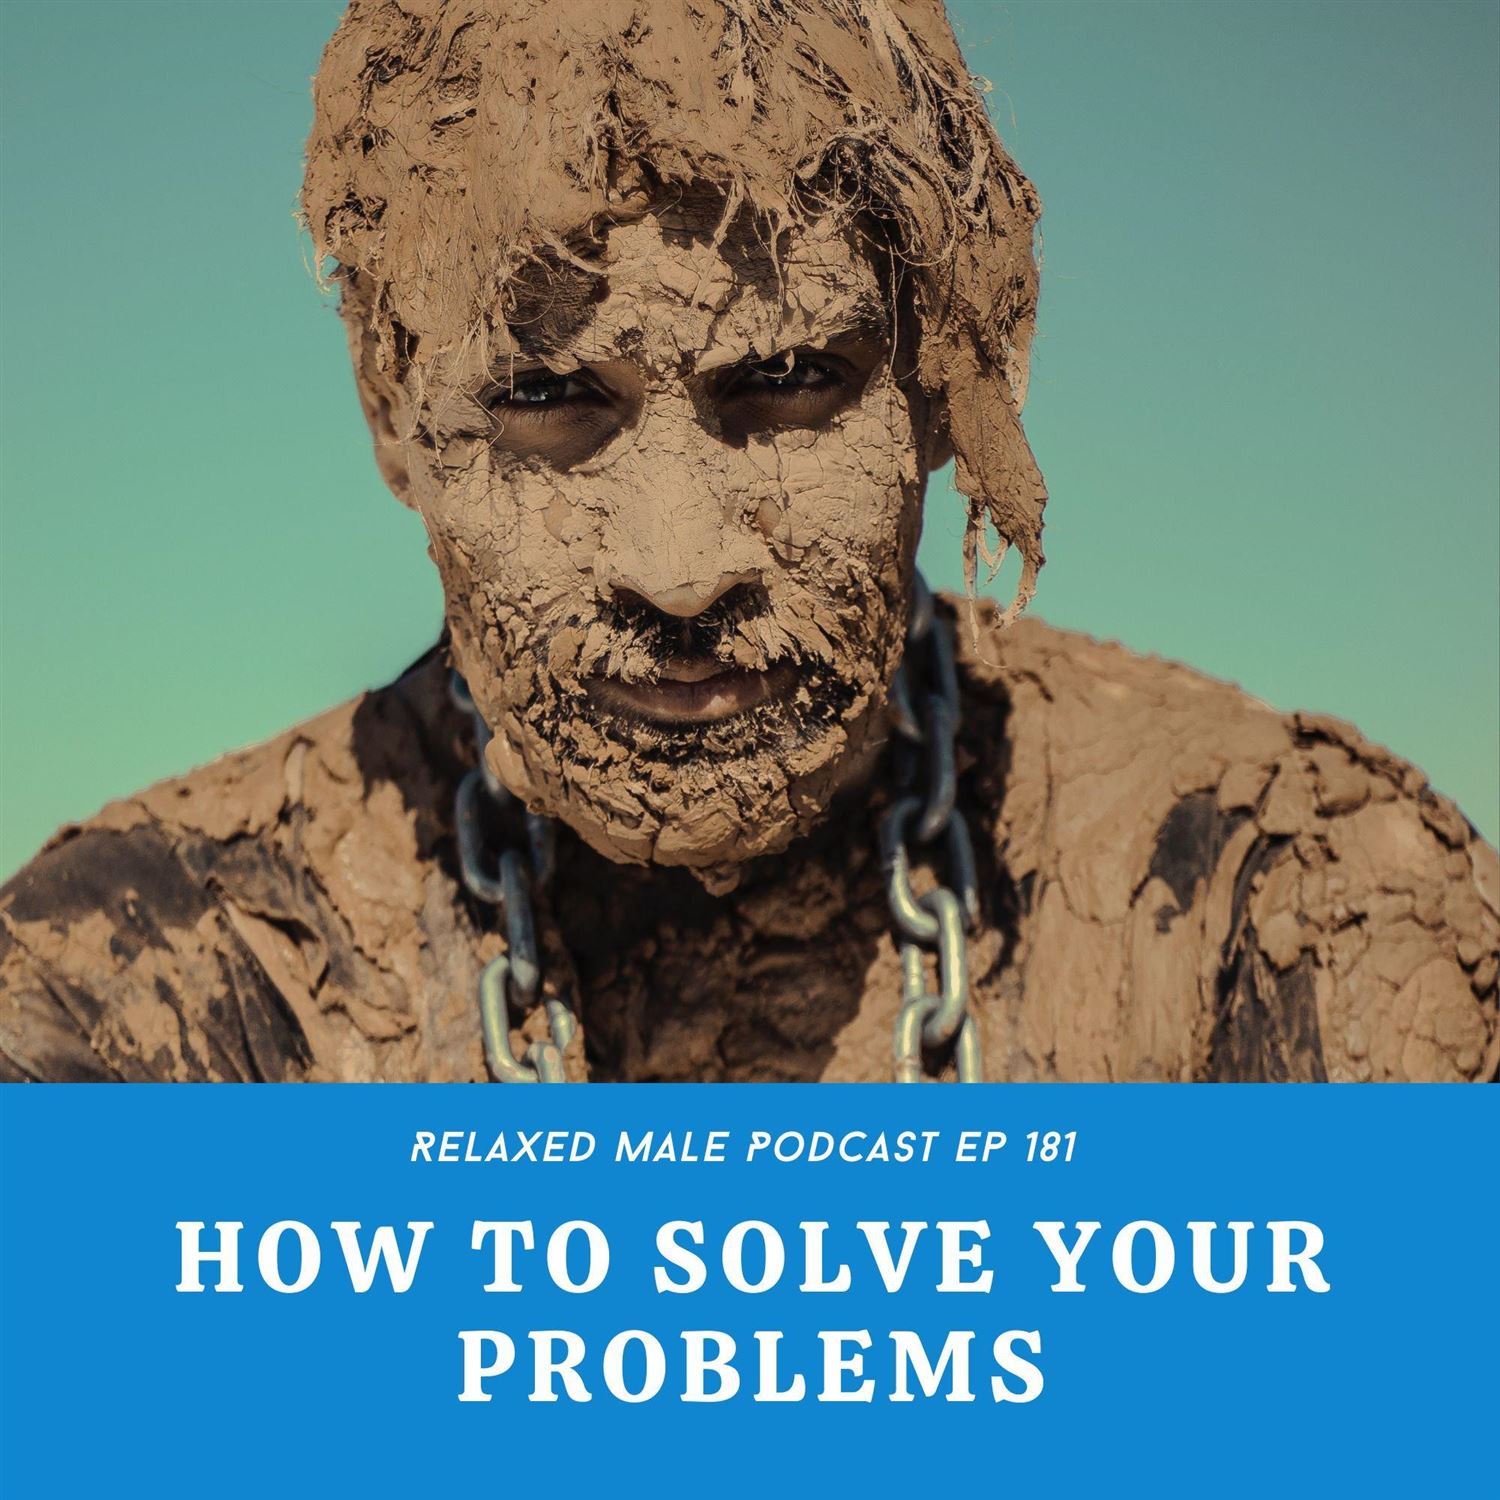 How To Solve Your Problems